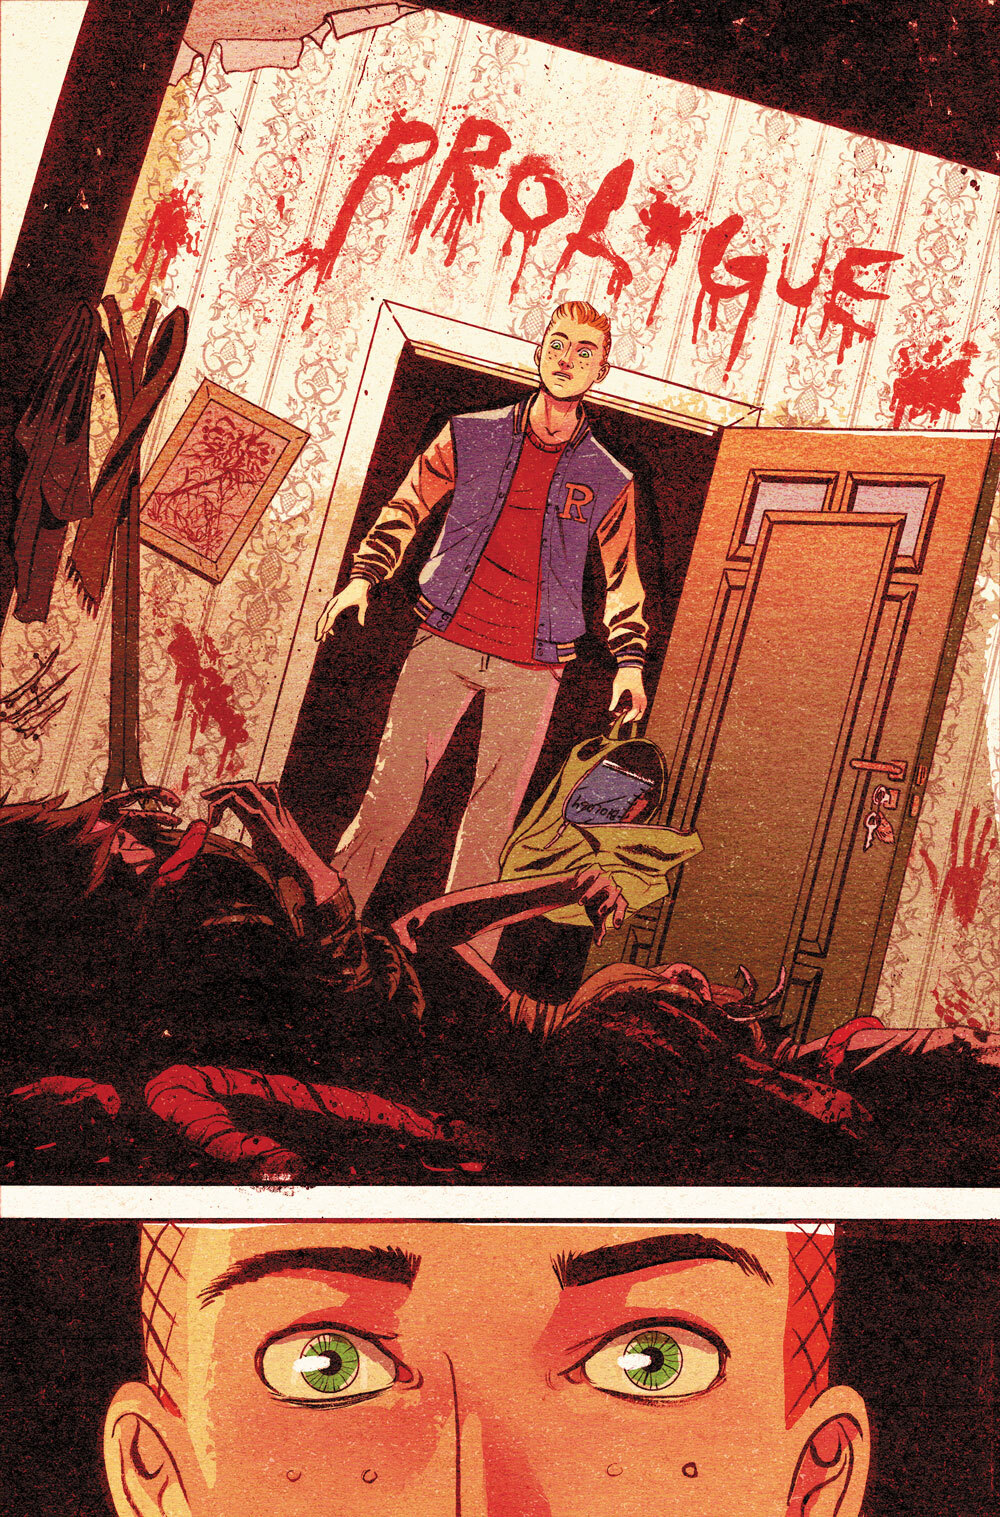 An Archie Comics page. Archie walks into a bloody room with the word "Prologue" scrawled on the wall in blood.